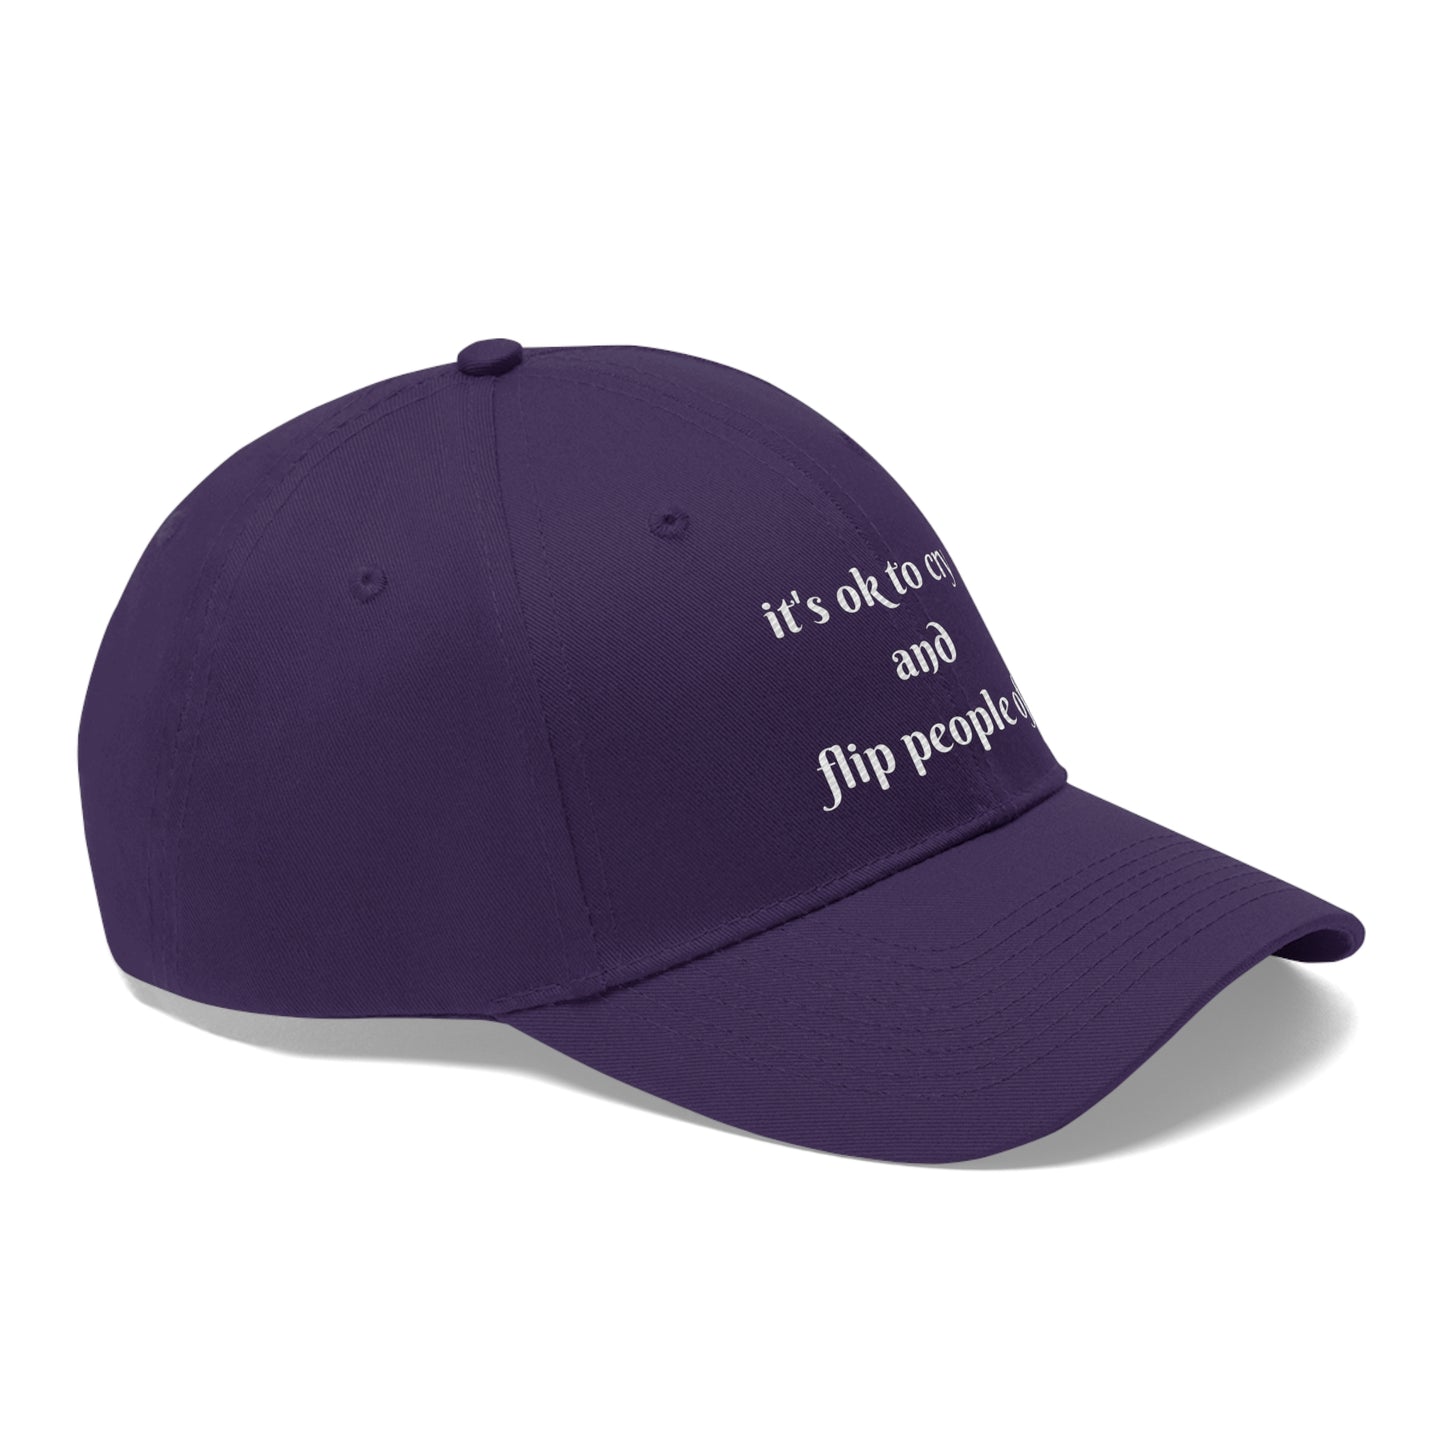 Expressive Freedom Embroidered Hat - "It's Okay to Cry and Flip People Off"